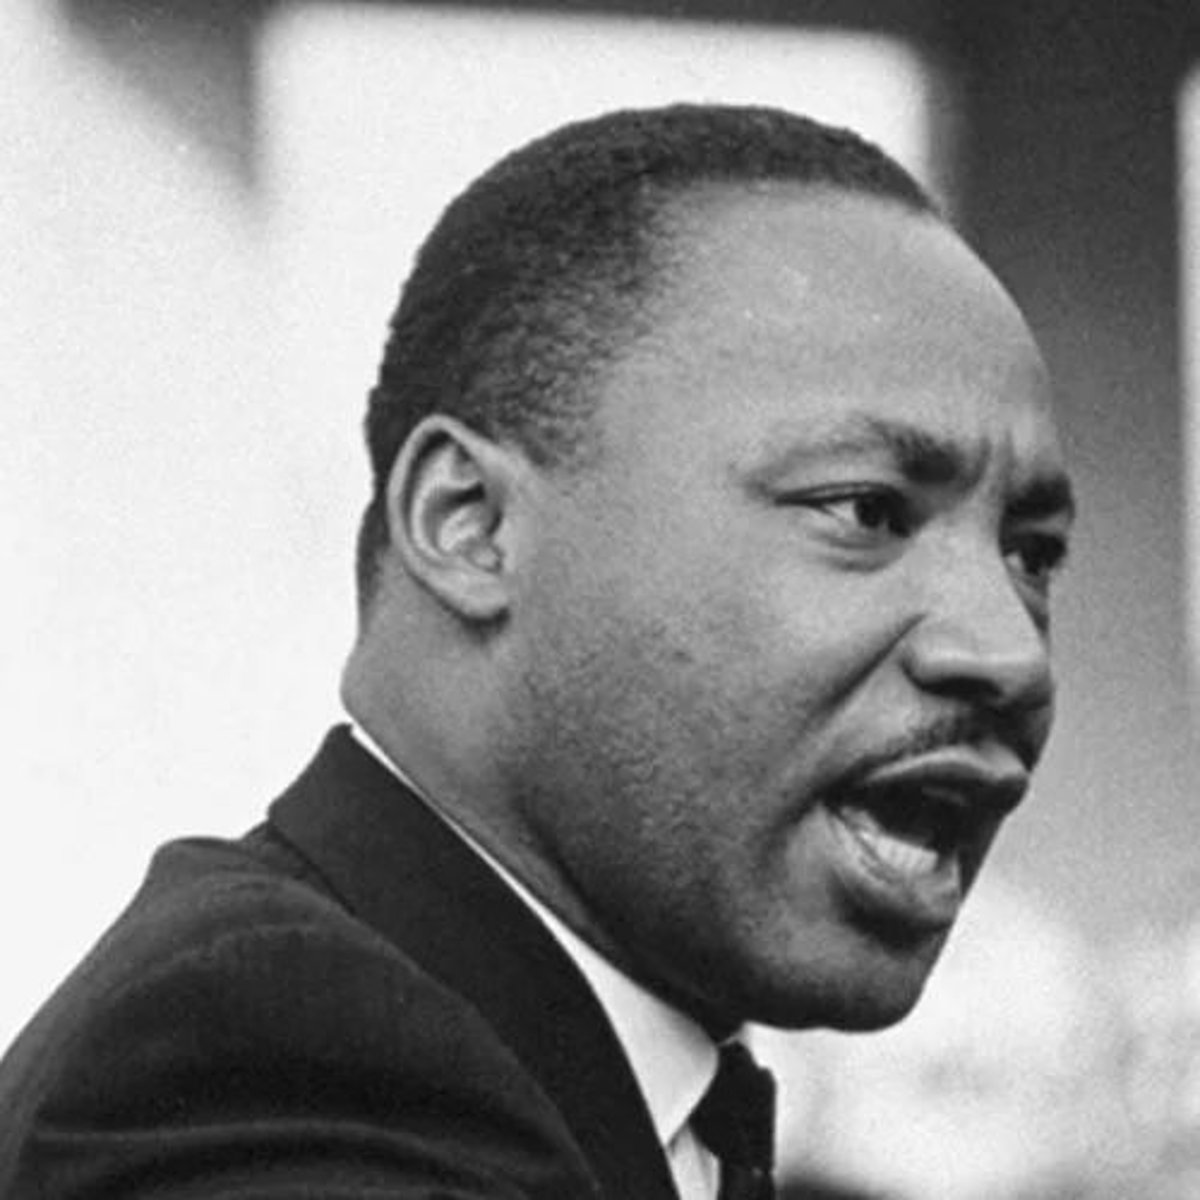 Martin Luther King Jr. (American Minister)